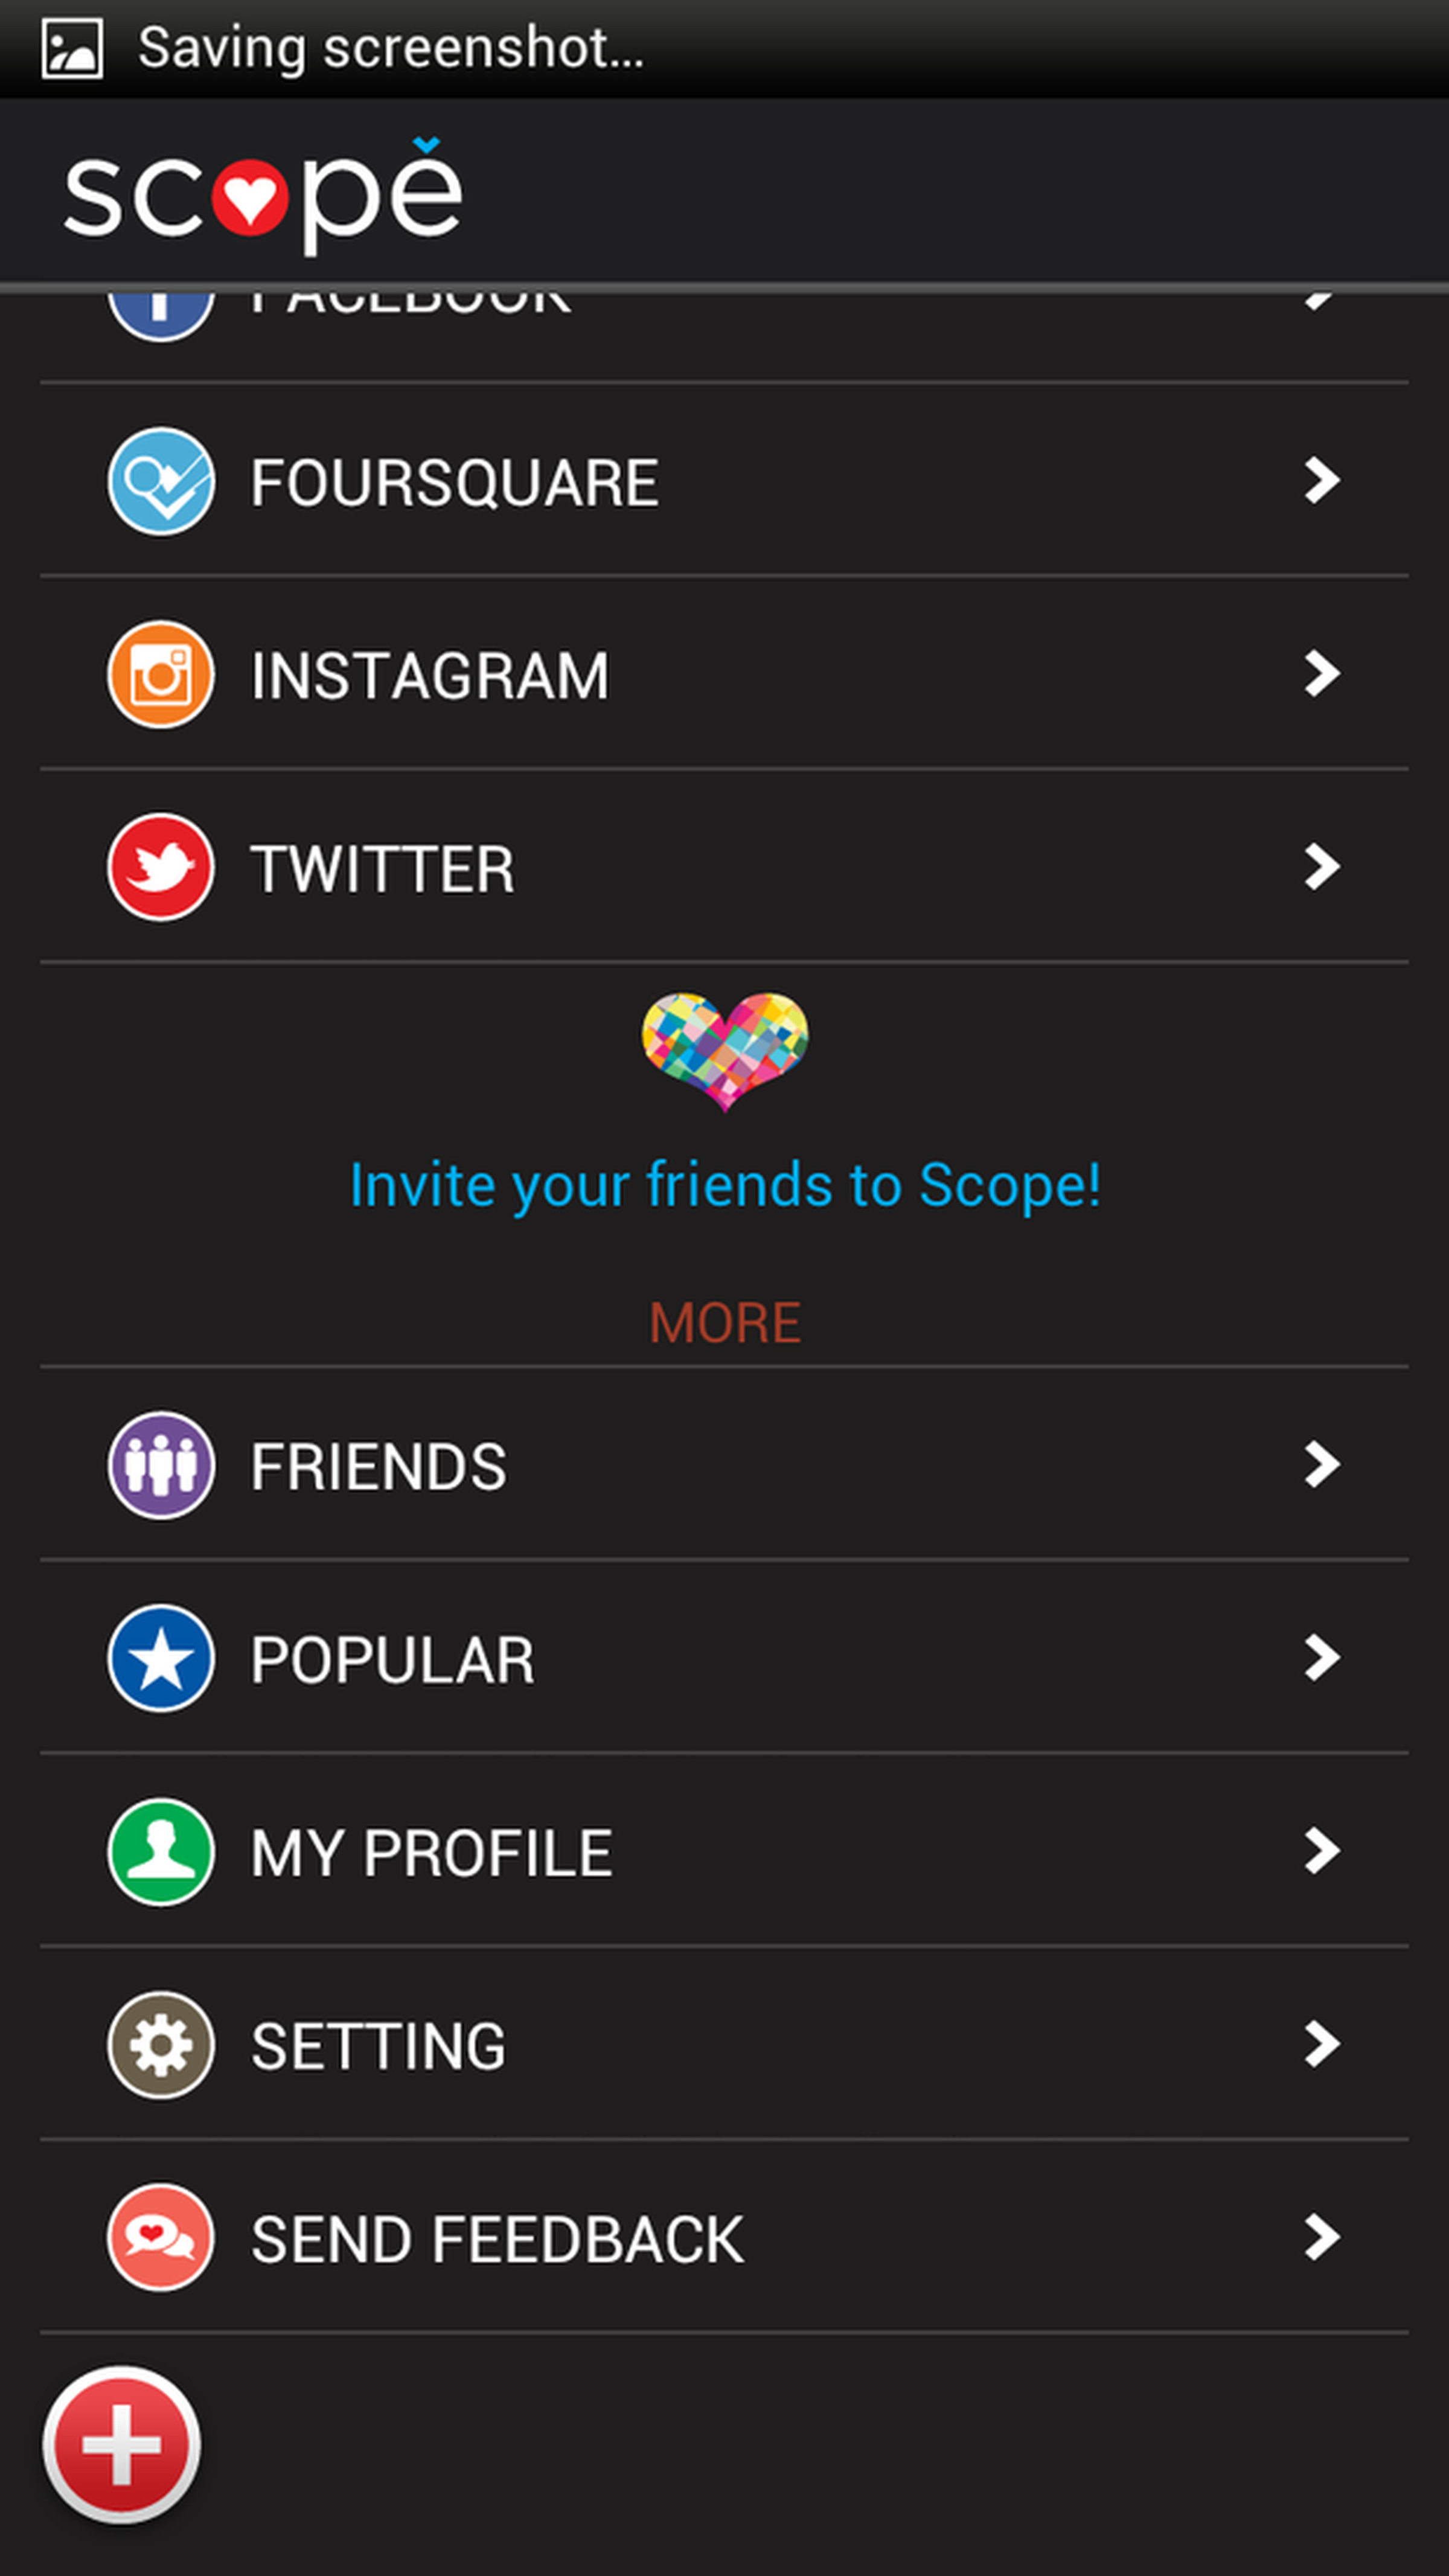 Scope for Android private beta screenshots